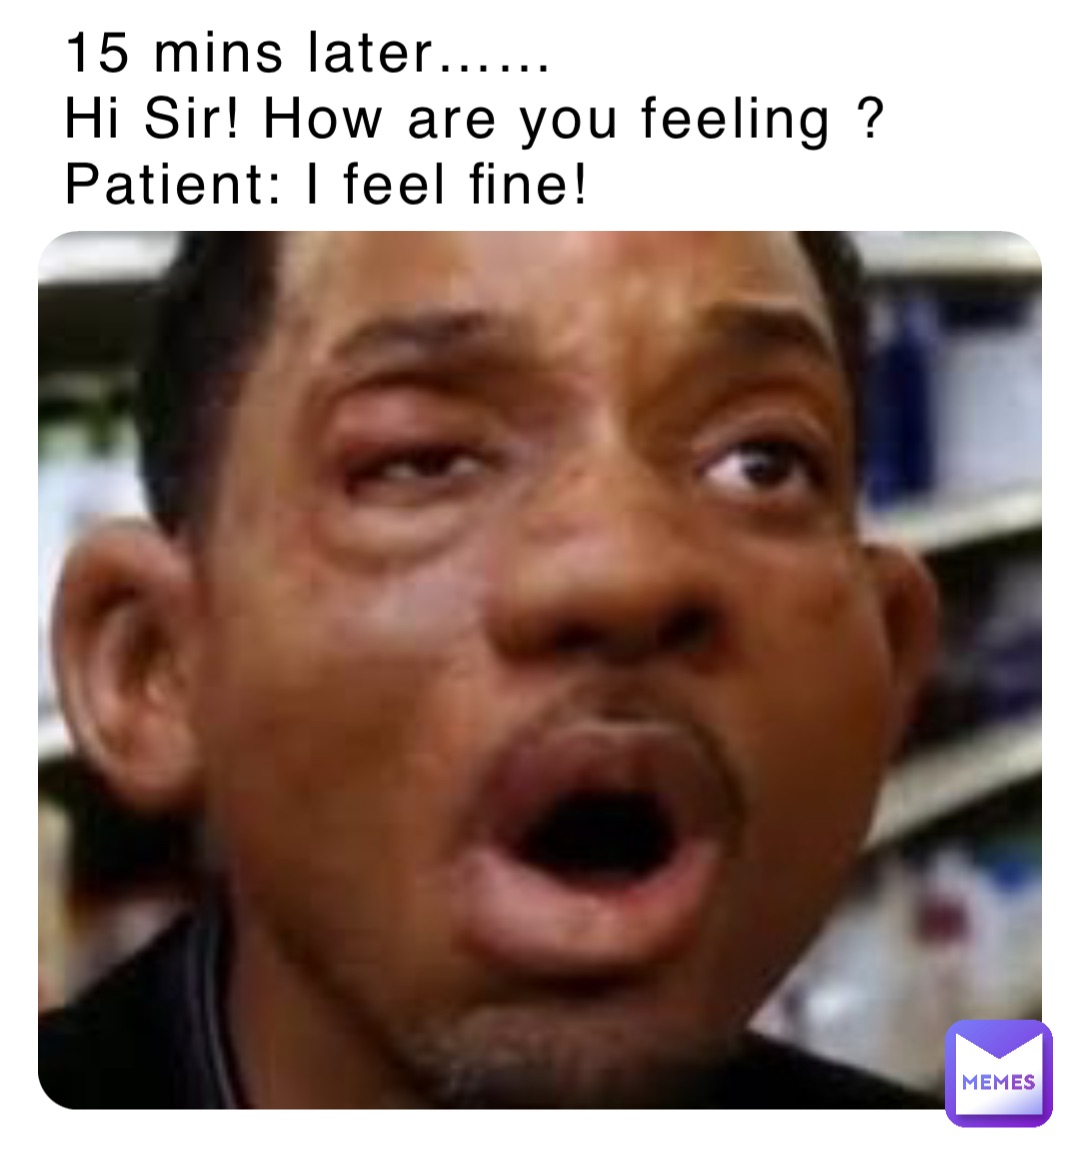 15 mins later……
Hi Sir! How are you feeling ? 
Patient: I feel fine!